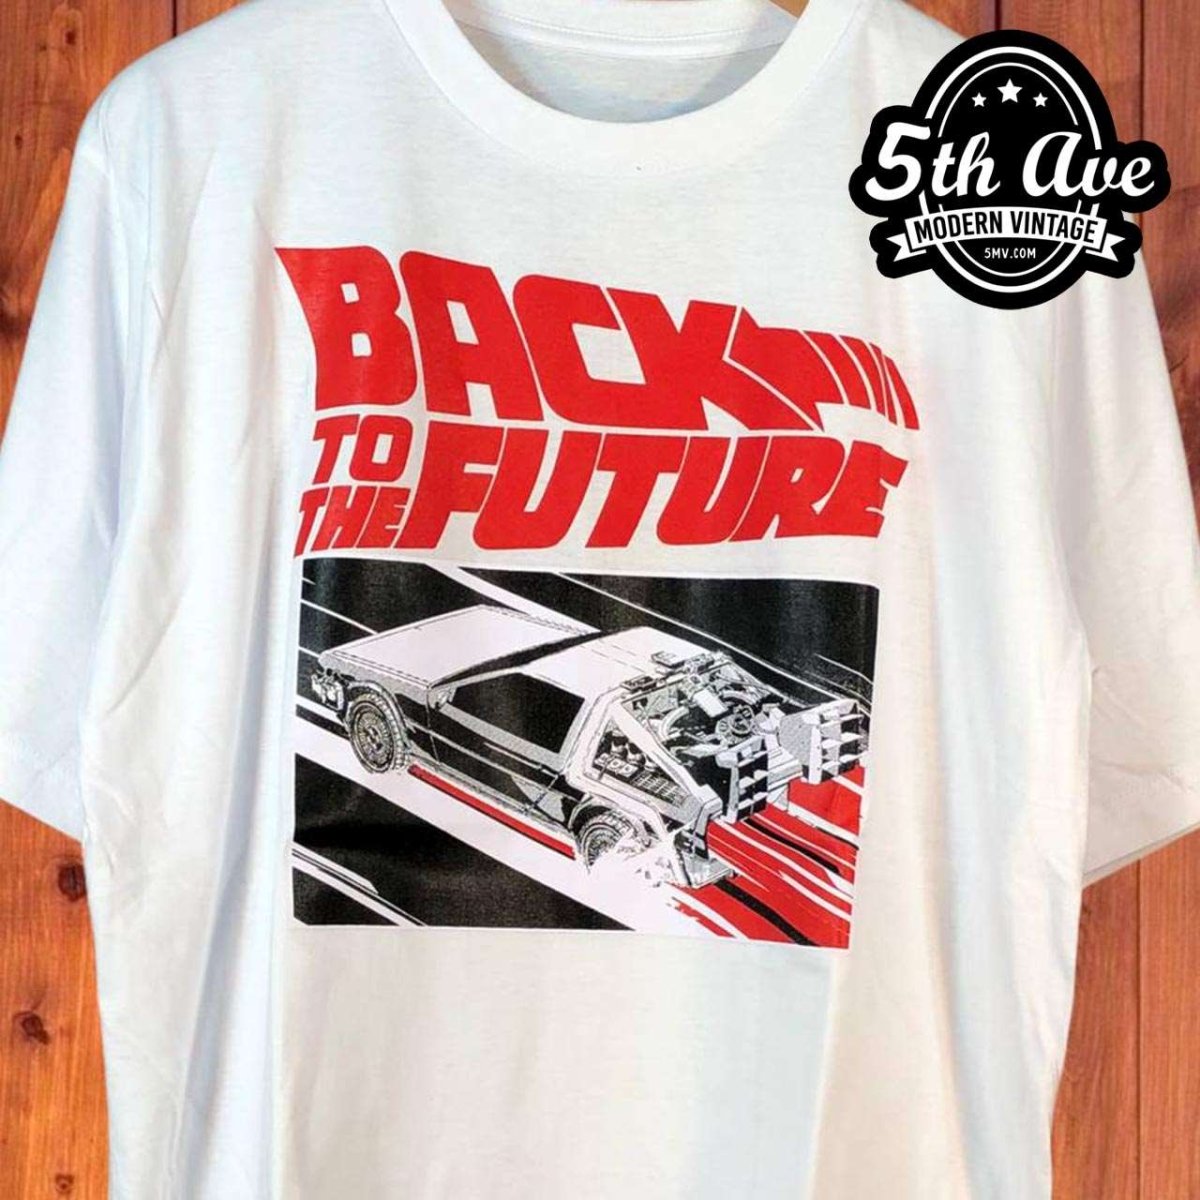 Back to the Future Vintage Movie t shirt - Vintage Band Shirts